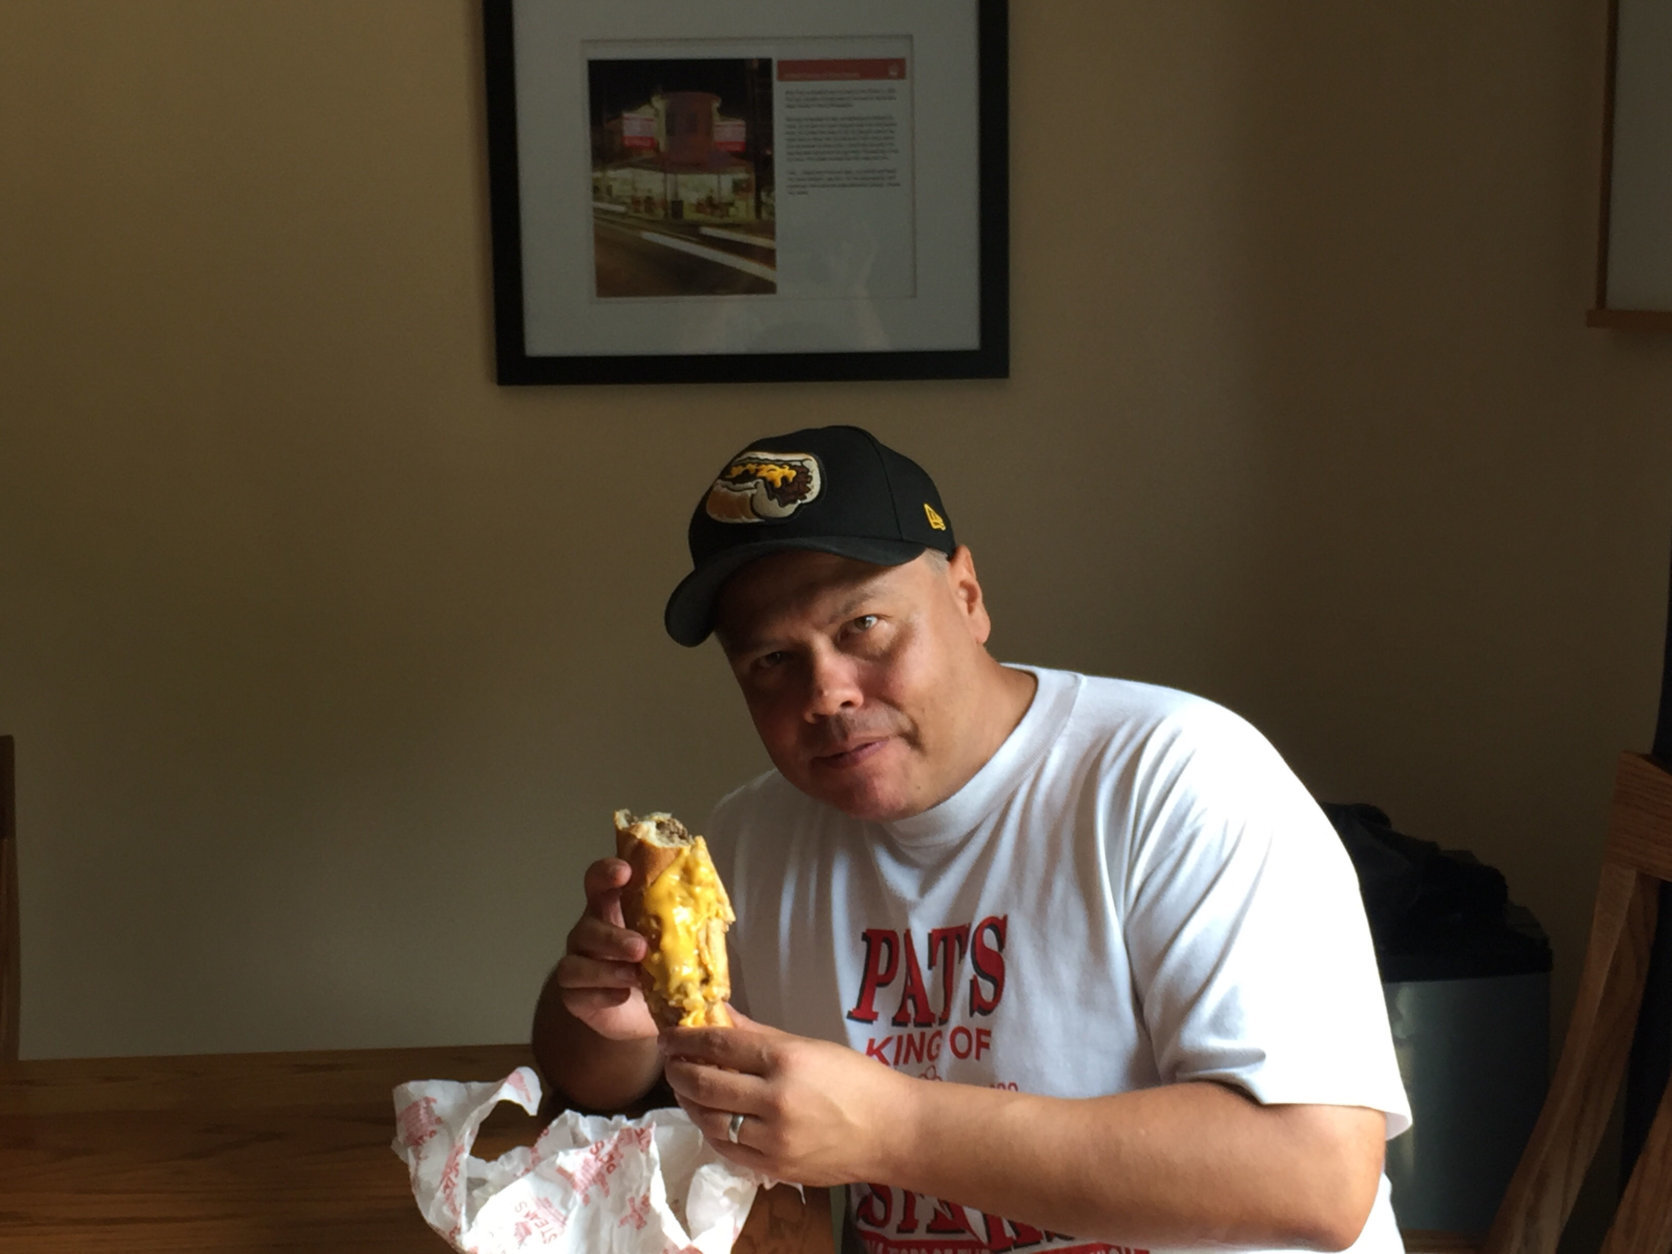 "I have to be honest," said editor Mike Jakaitis after taking his first bite, "for a cheesesteak to come through the mail and you put it in the oven, it tastes pretty darn good!" (WTOP/Mike Jakaitis)